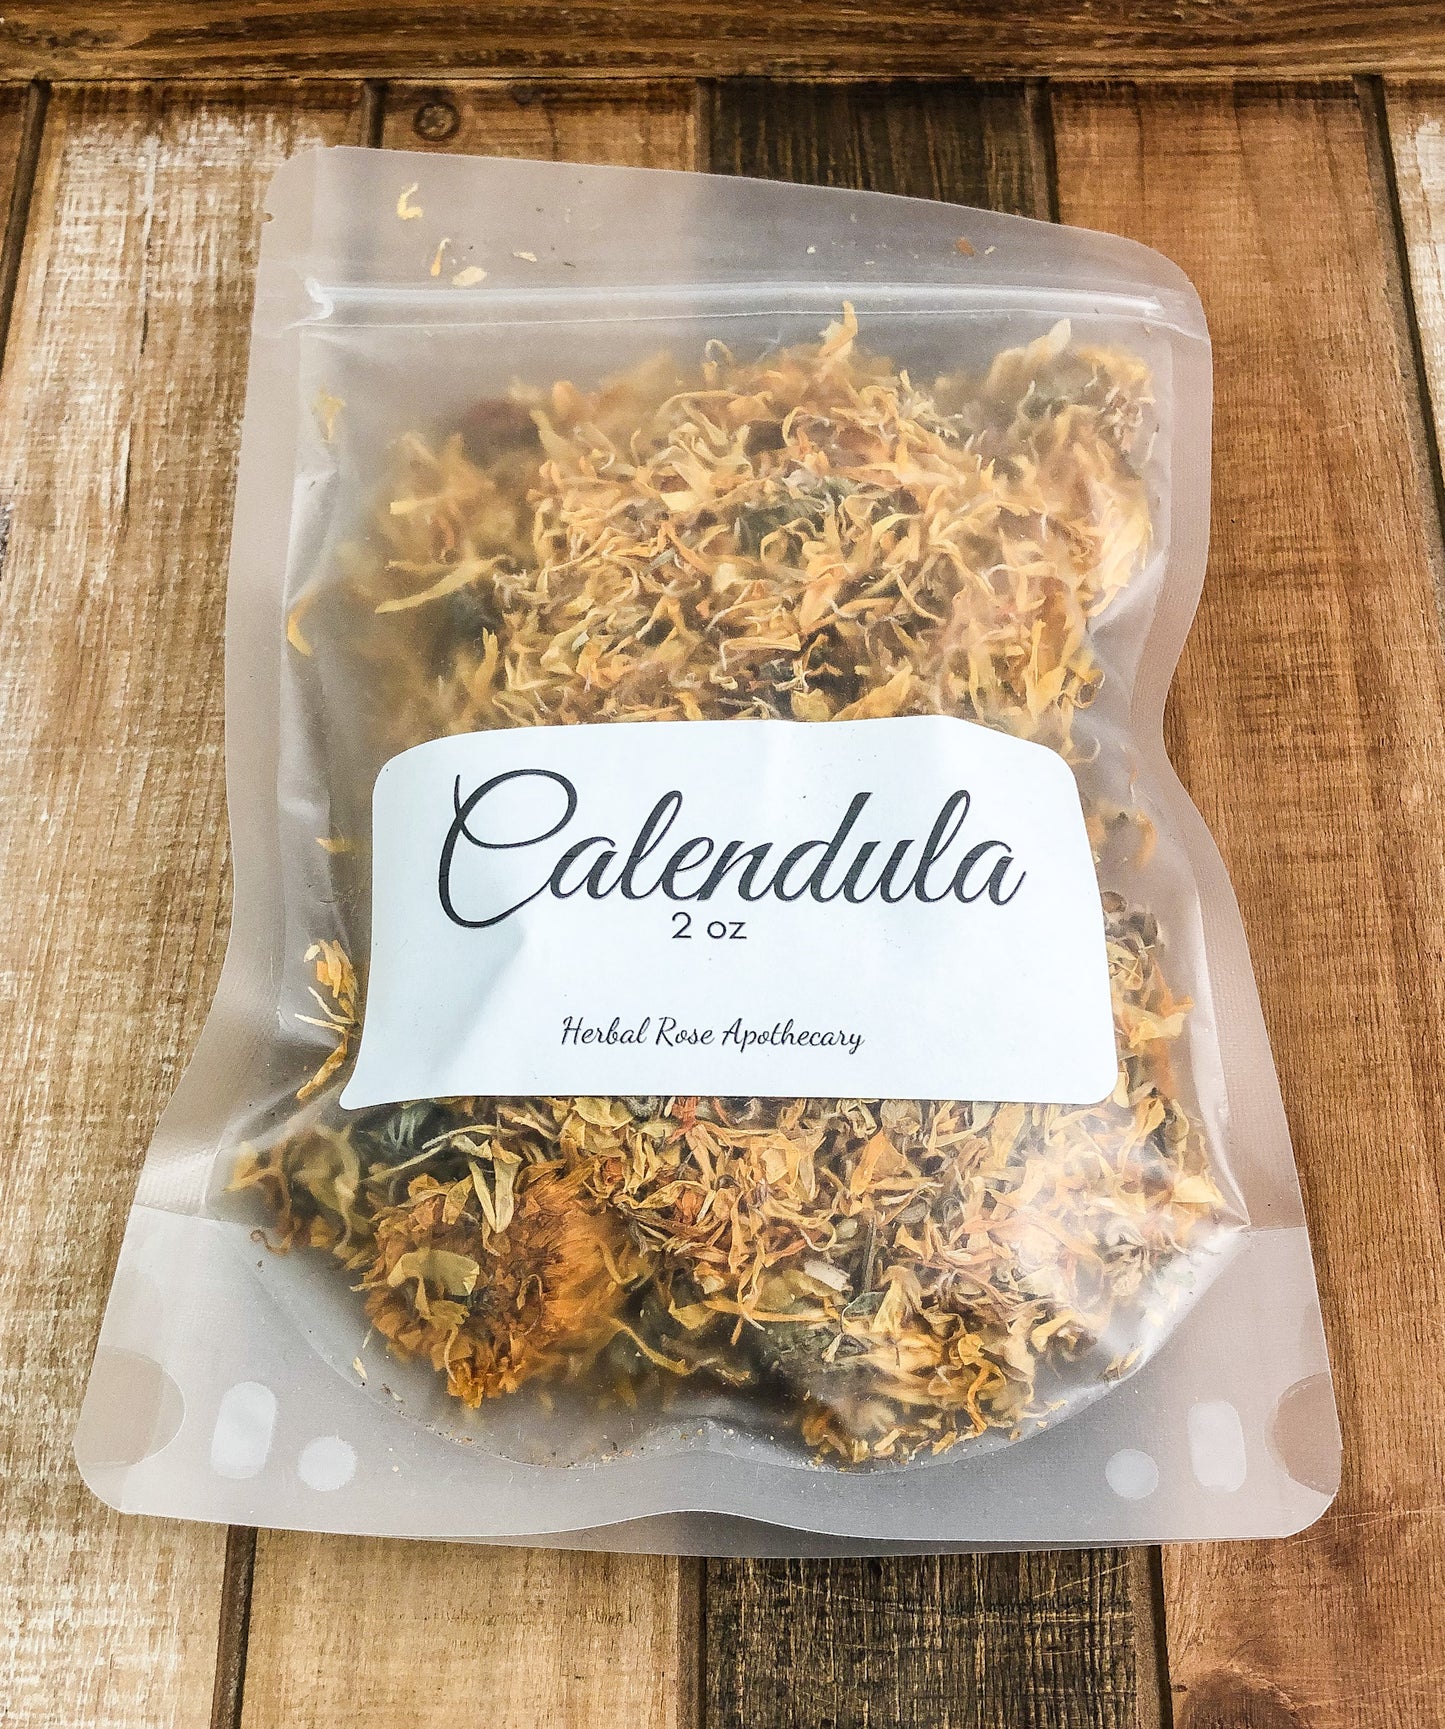 2oz dried calendula flowers in a clear plastic bag with a wooden background